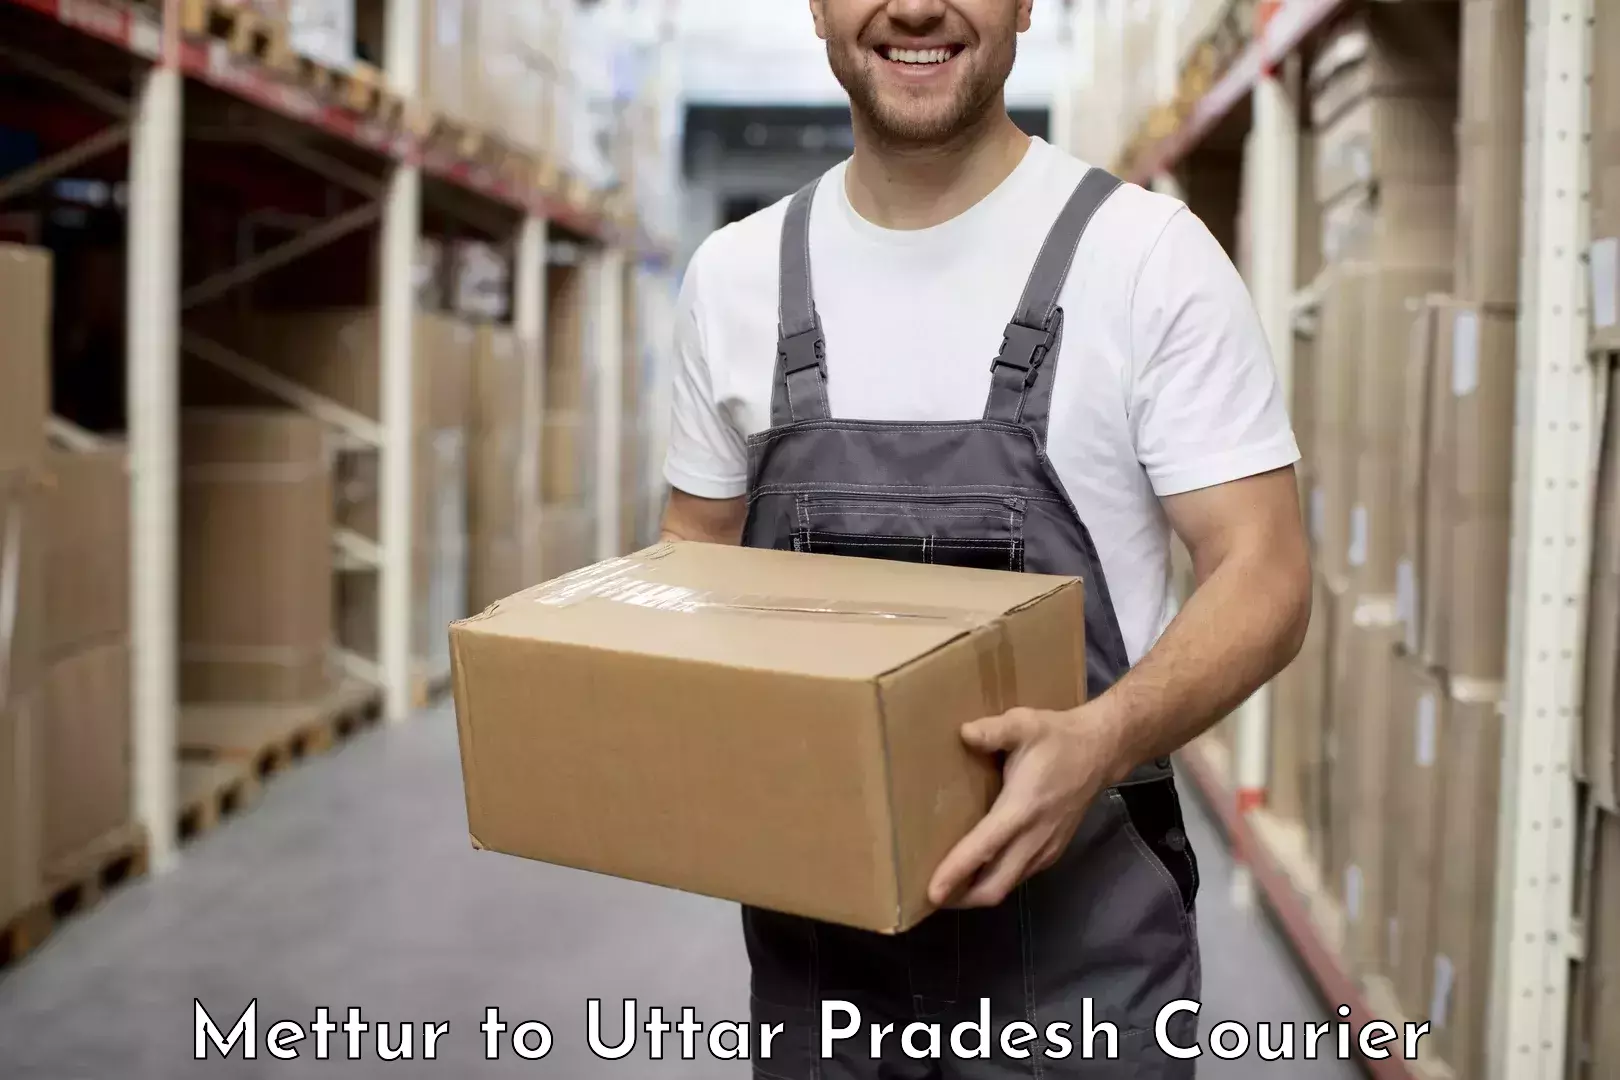 Cash on delivery service Mettur to Kushinagar